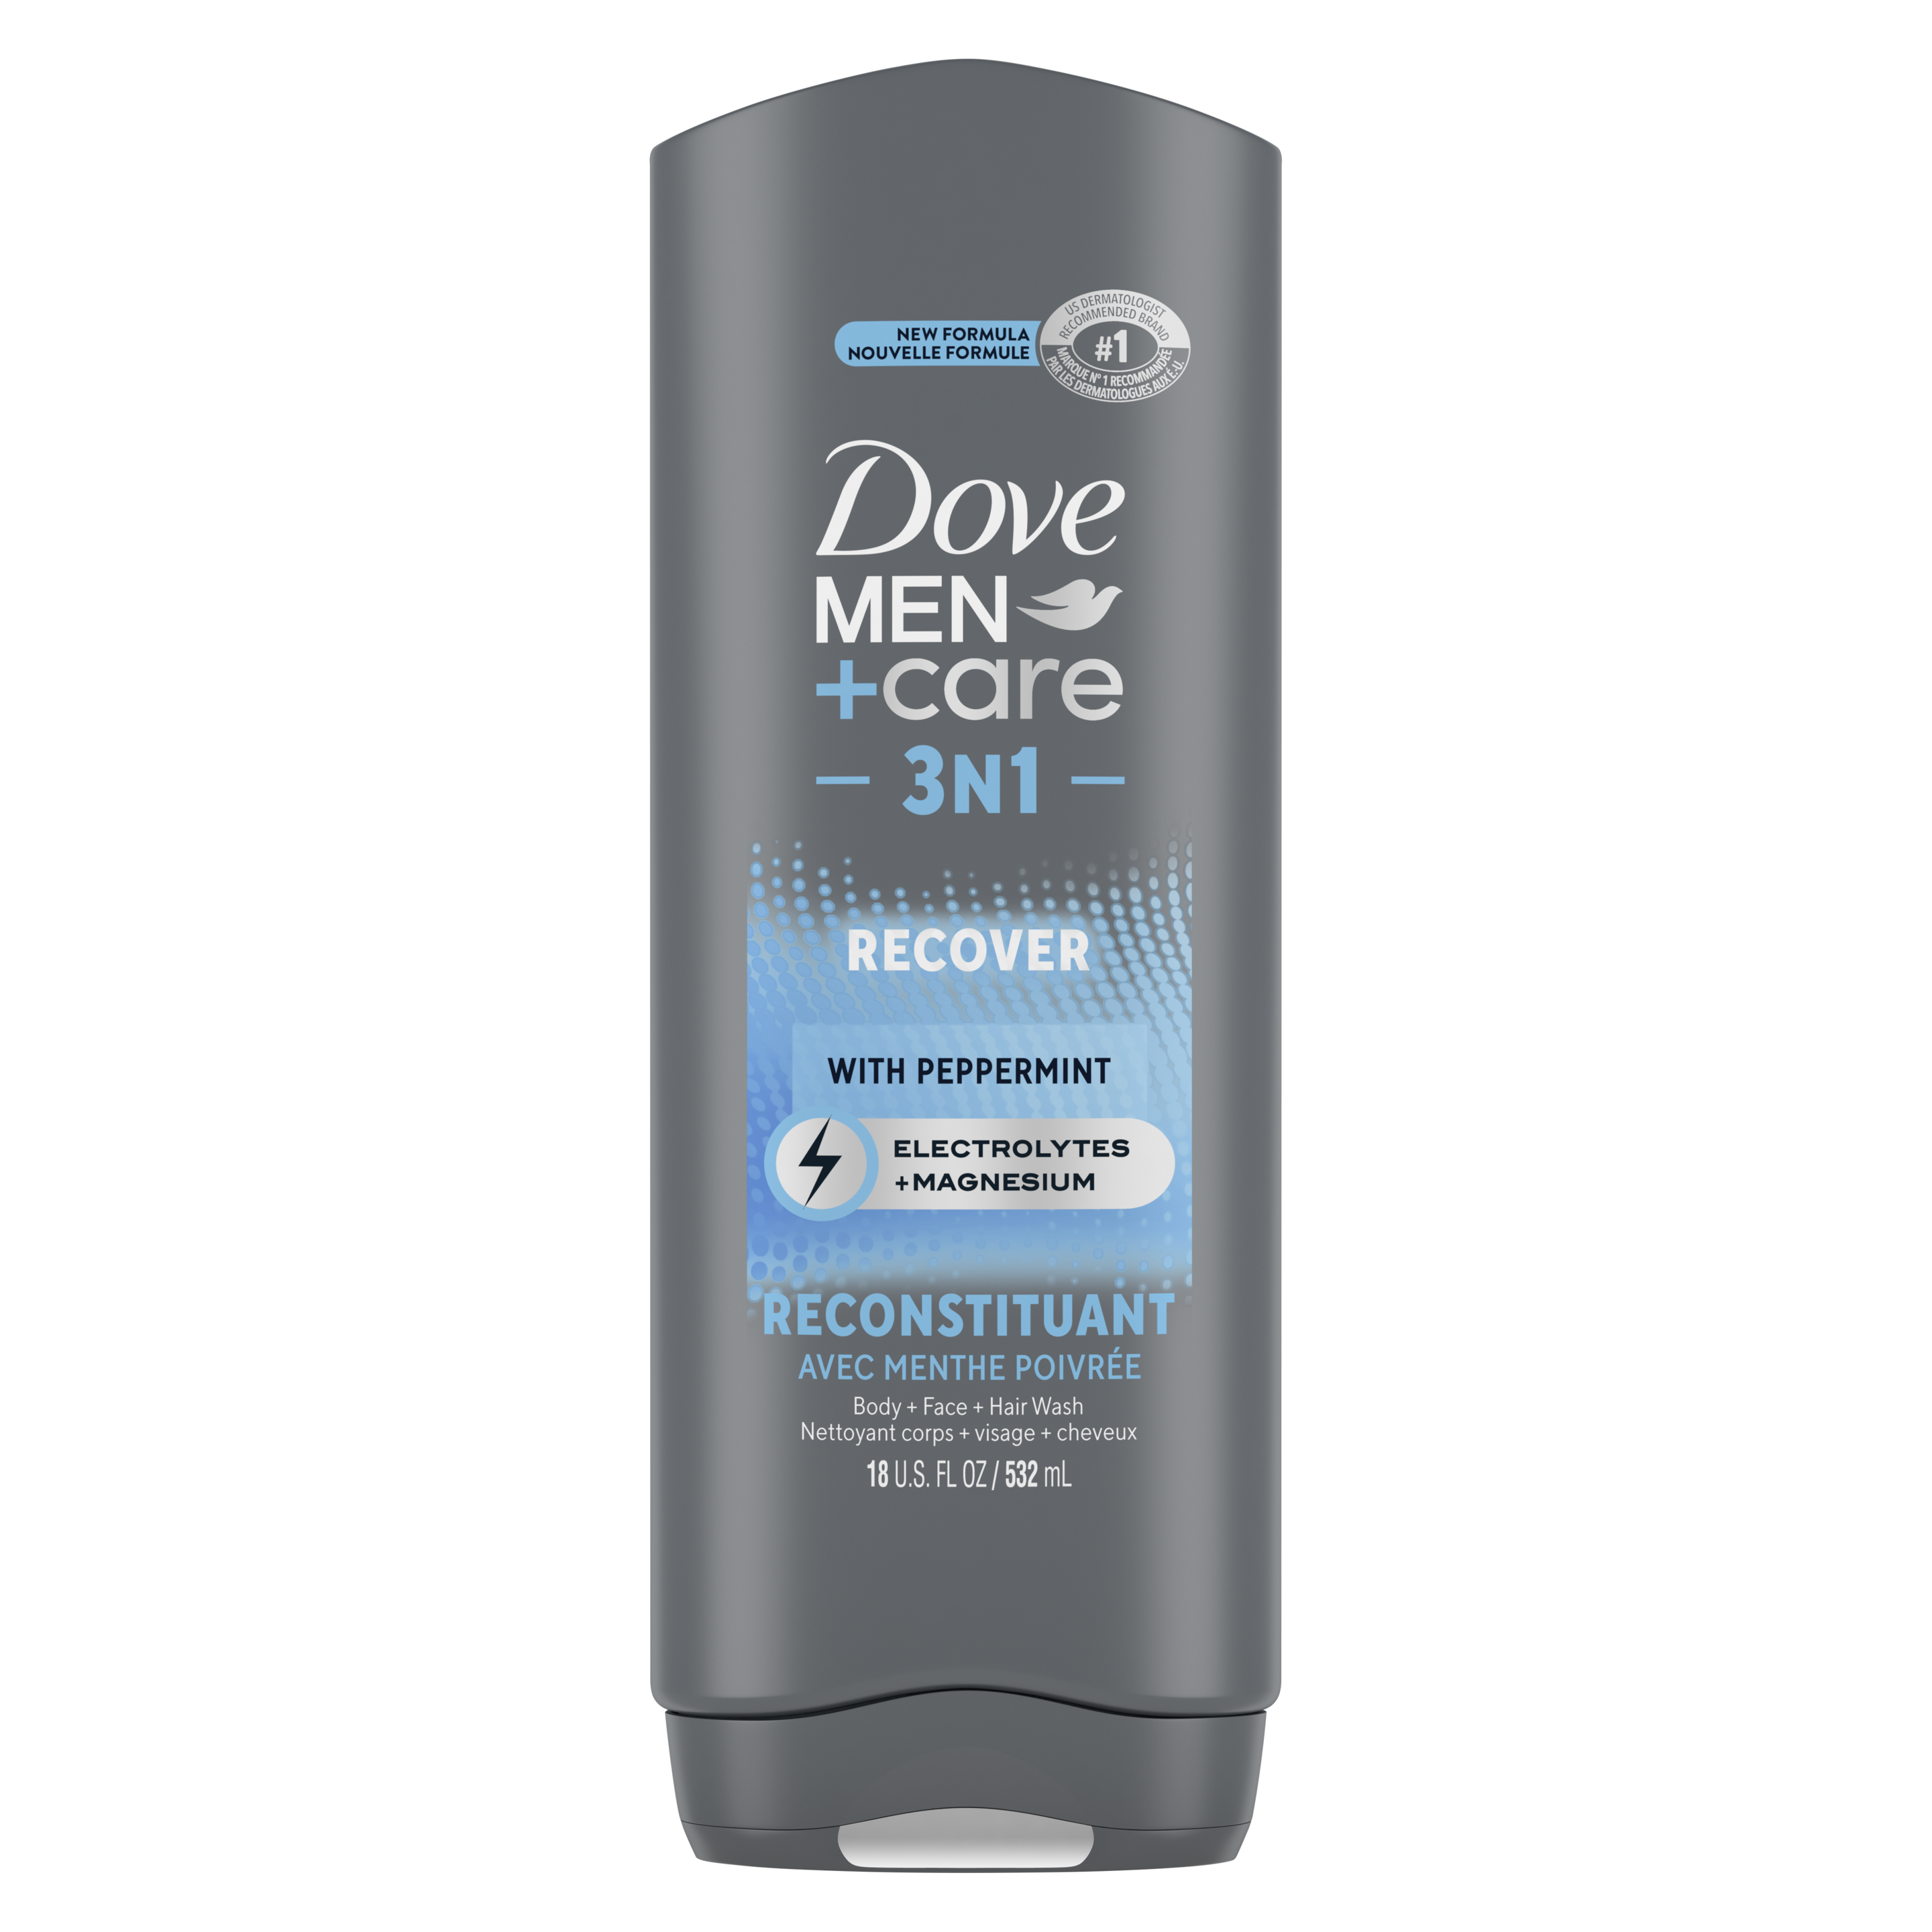 Dove Men+Care 3N1 Recover with Peppermint Body